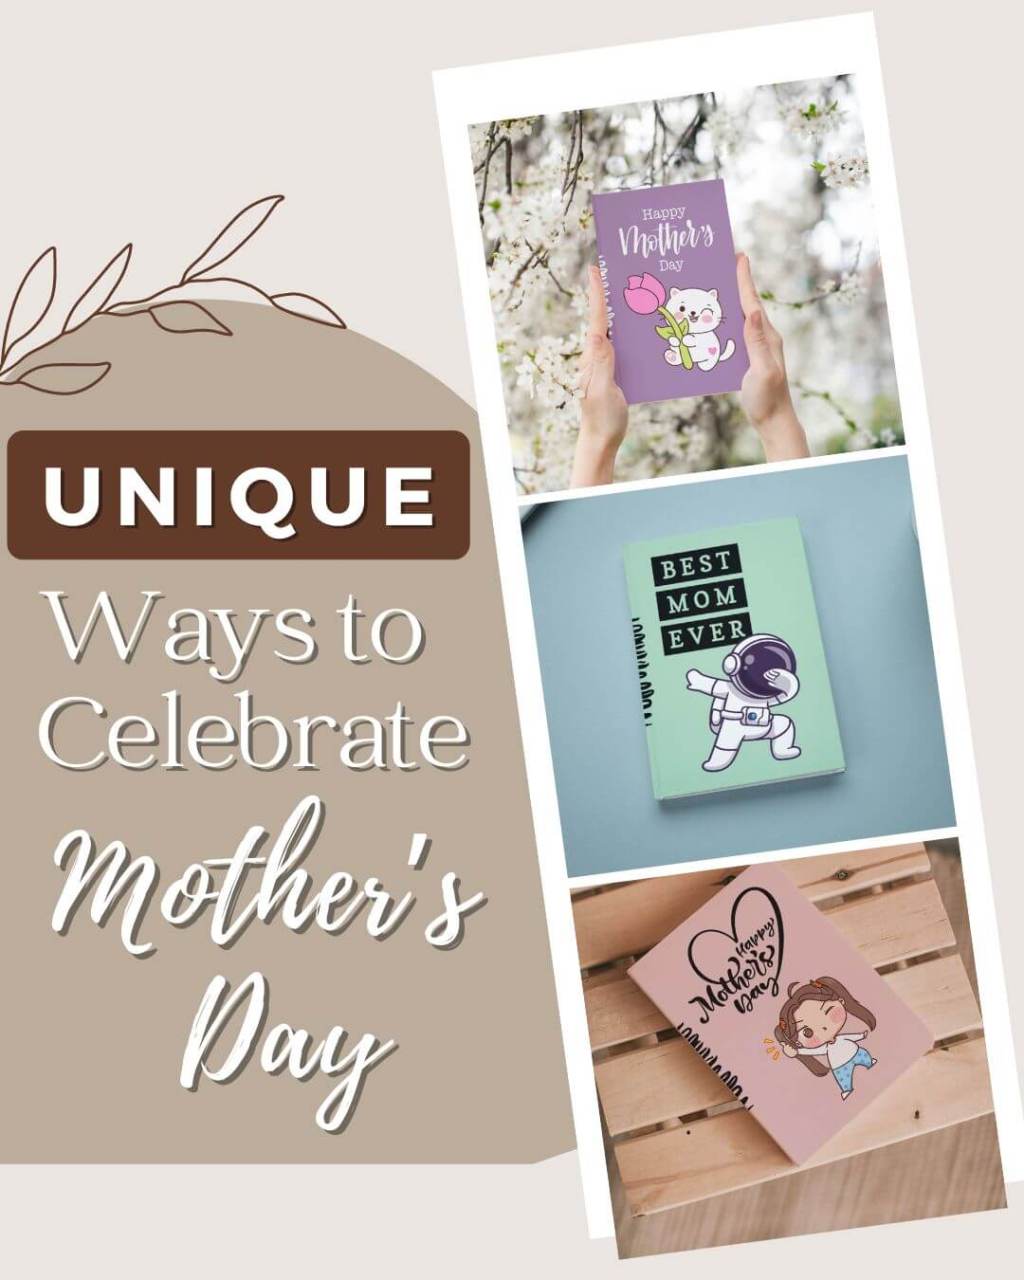 10 Unique Ways to Celebrate Mother’s Day